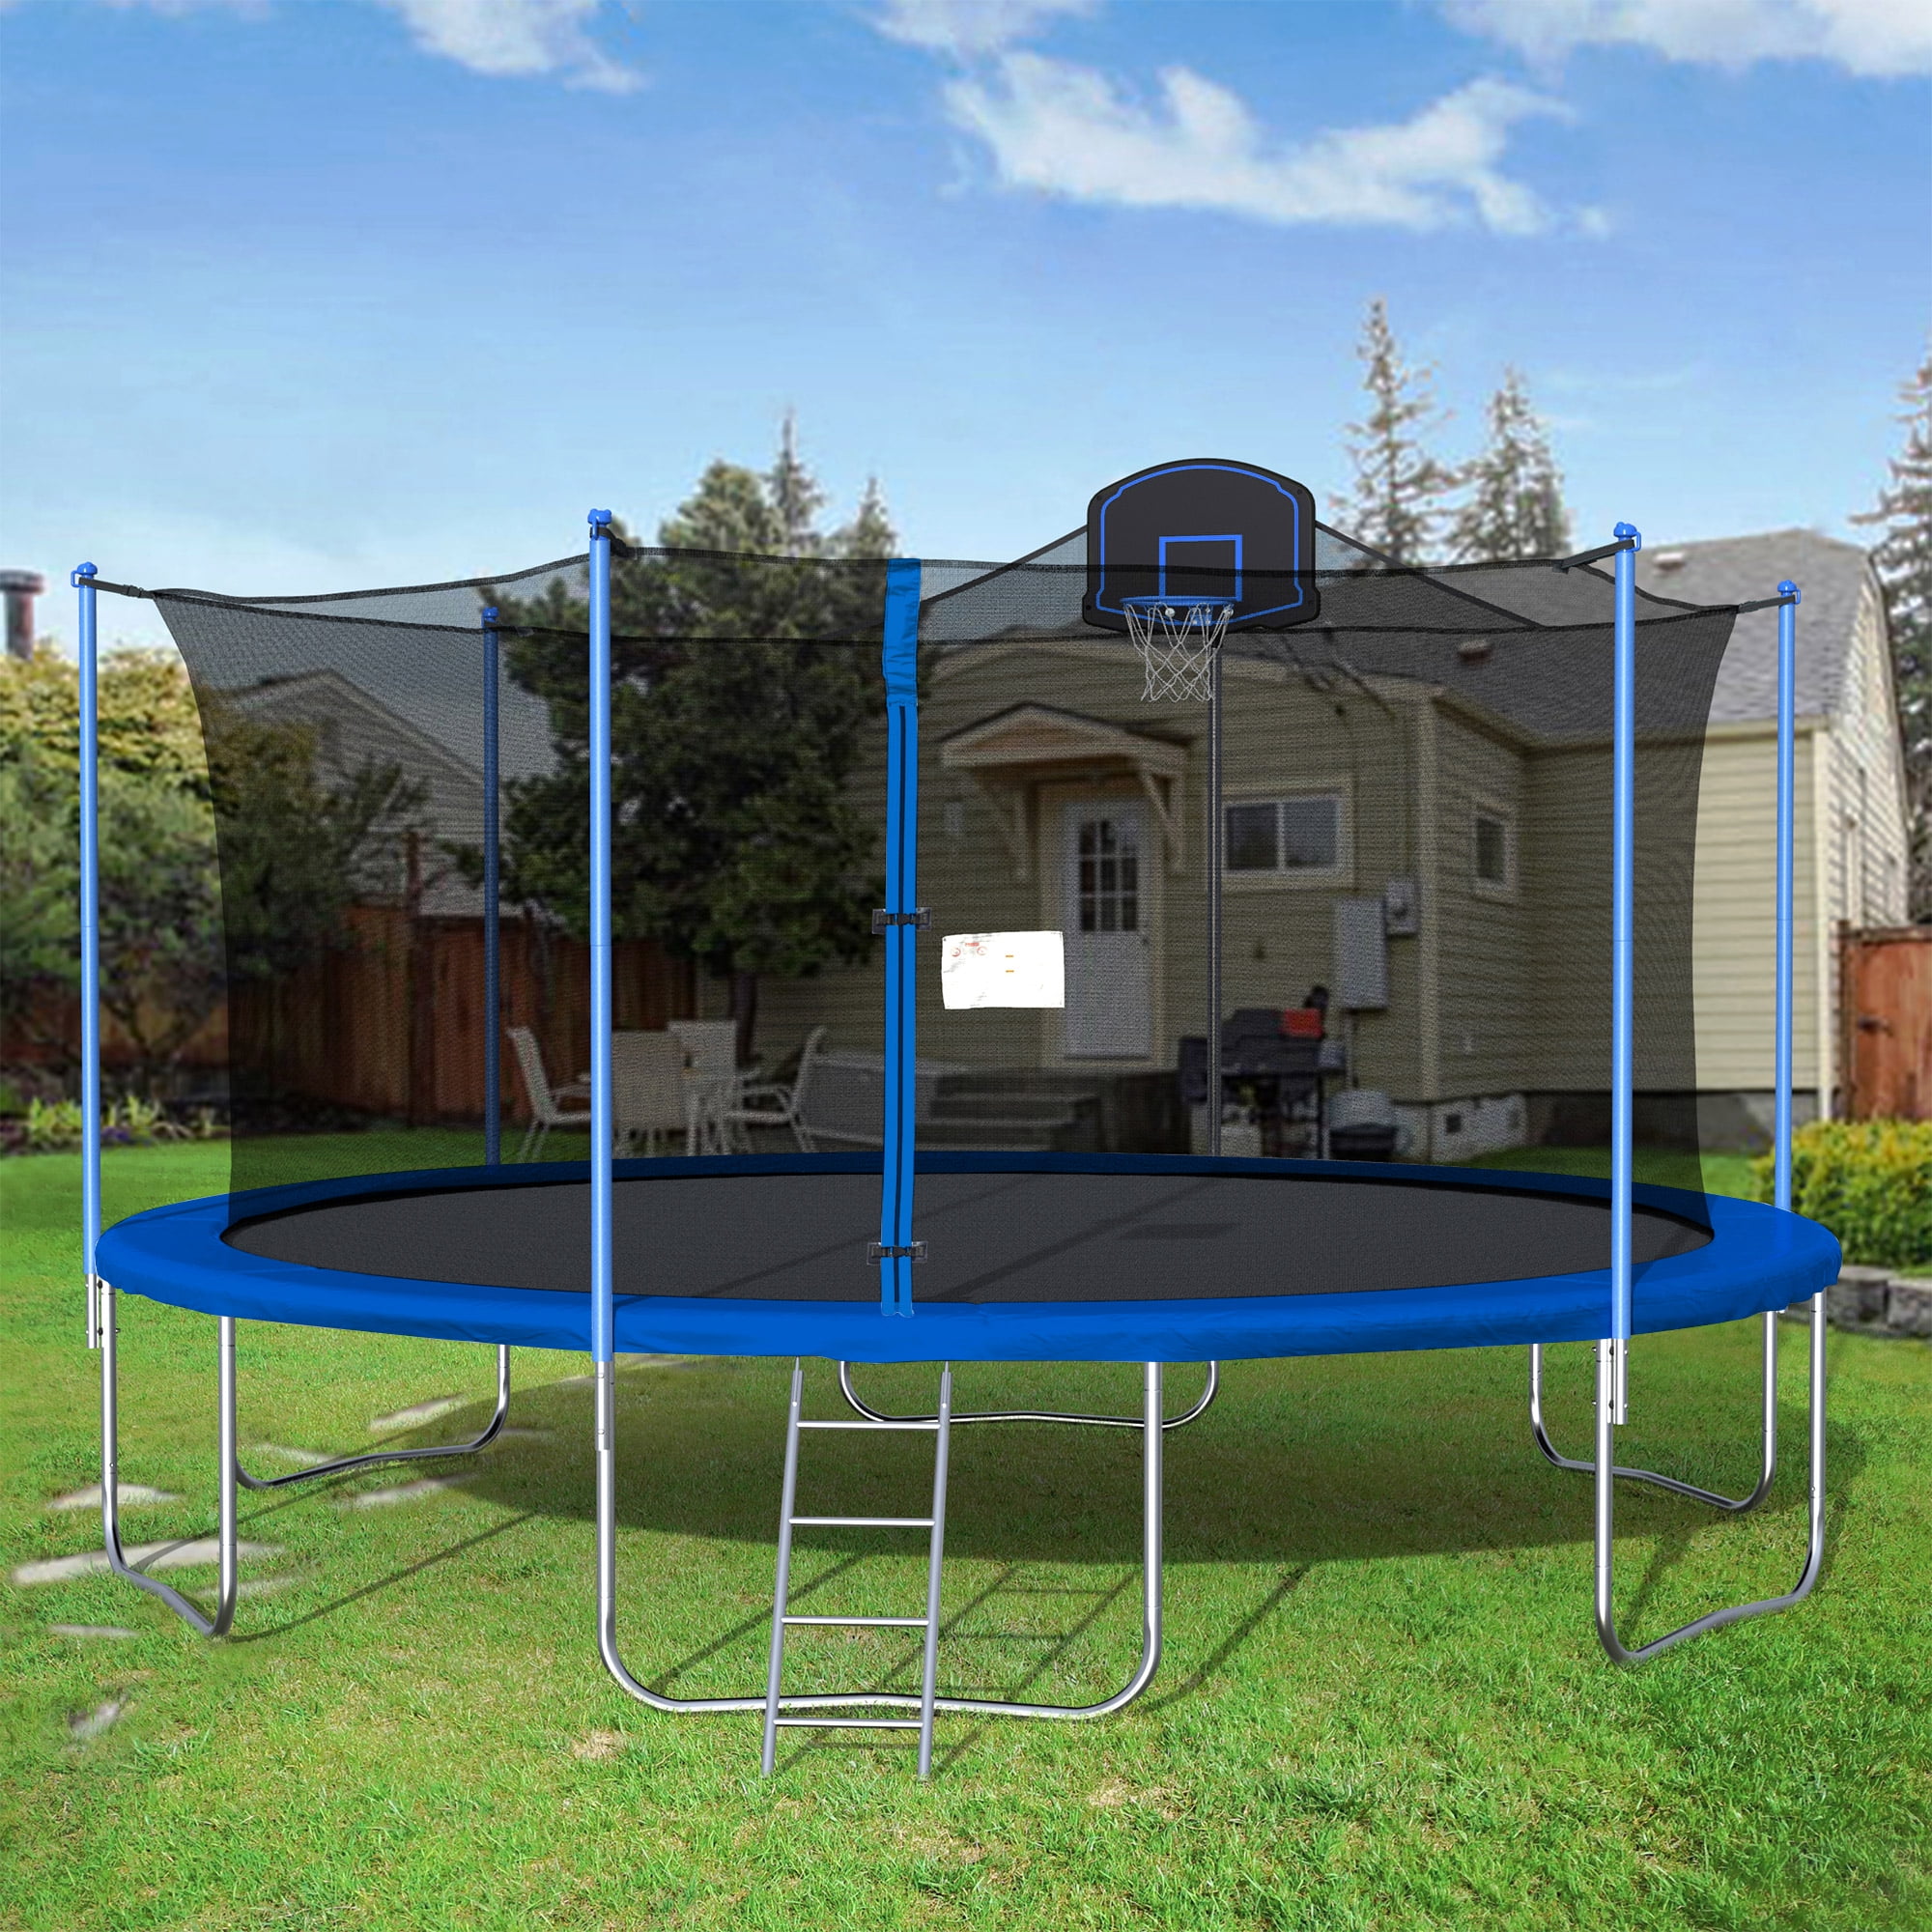 MOEO 1500 LBS 16FT Trampoline for Adults & Kids Green Outdoor Trampolines with Basketball Hoop Ladder and Safety Enclosure Net for Boys and Girls Sports Fitness Trampoline 